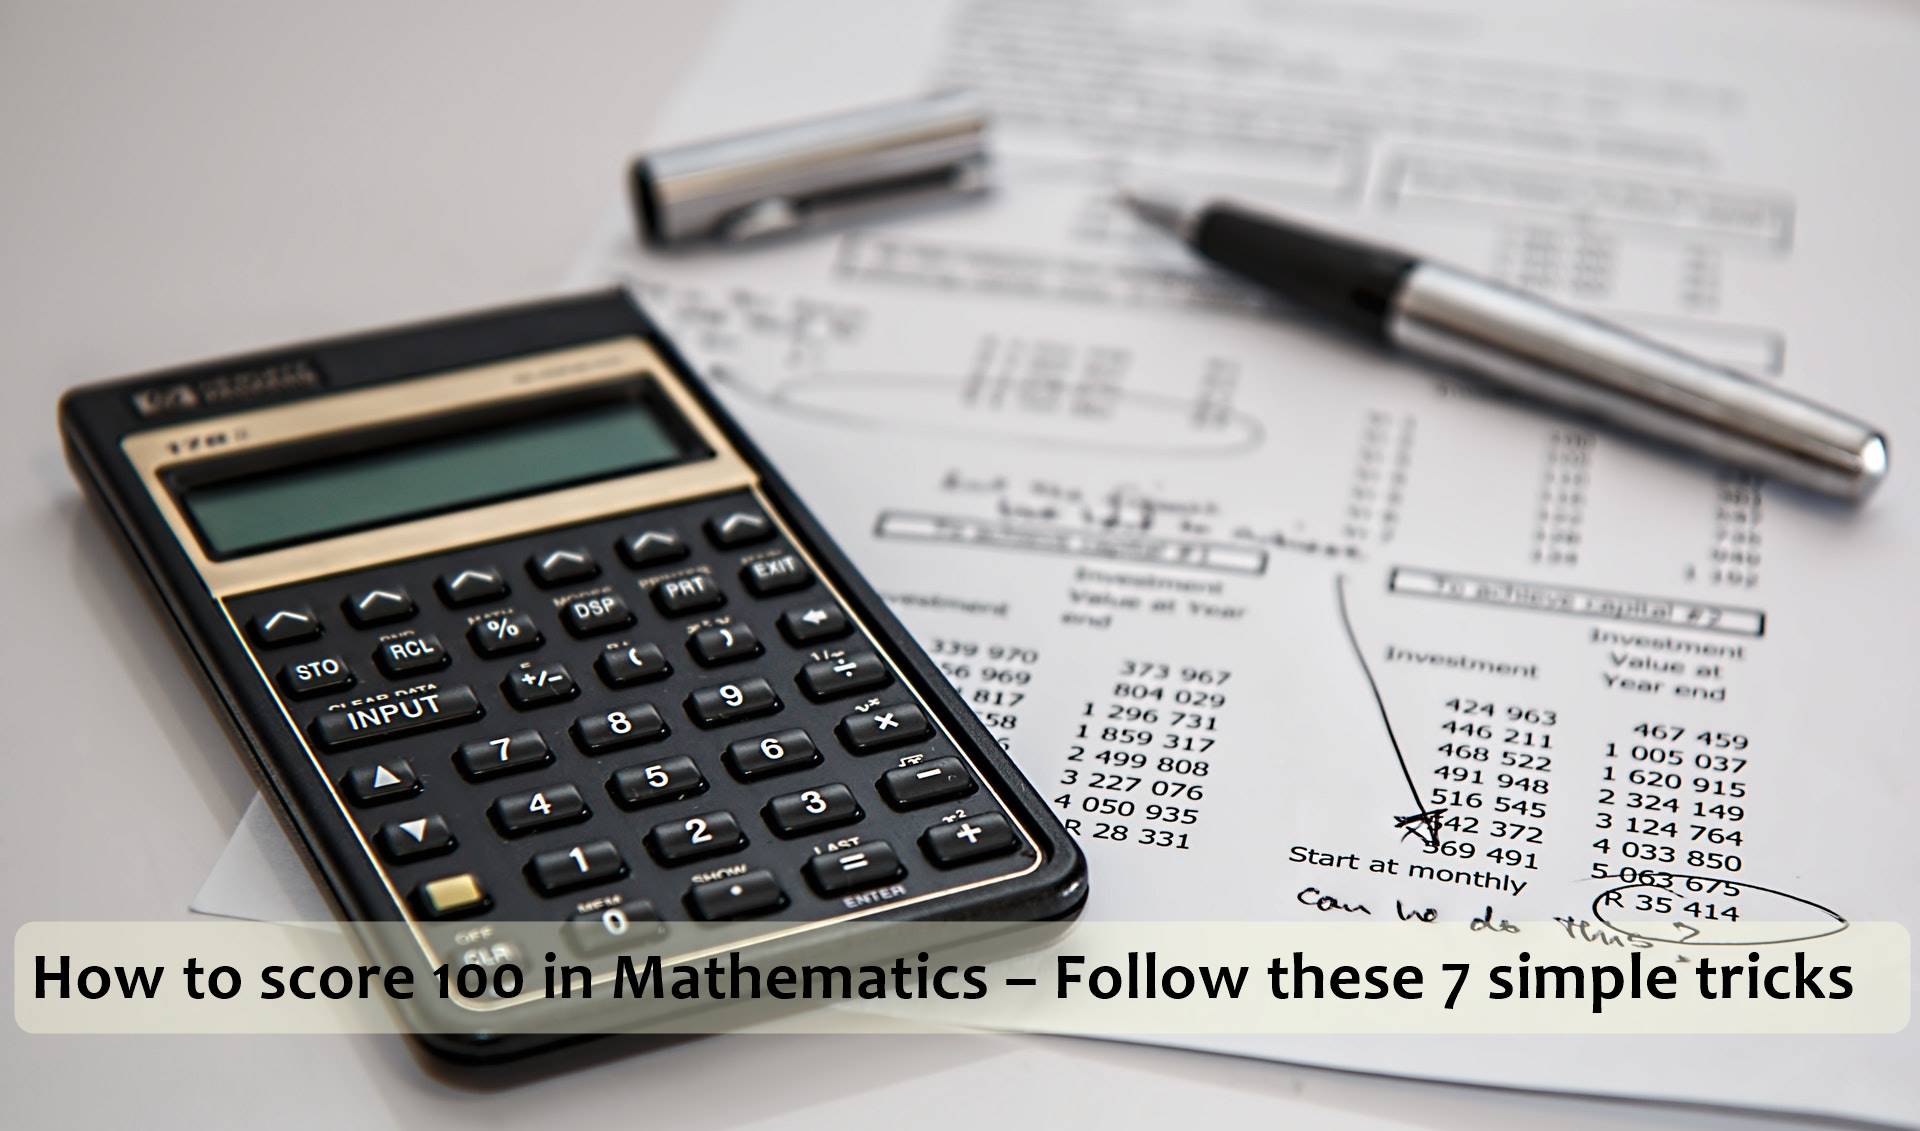 How to score 100 in Mathematics – Follow these 7 simple tricks